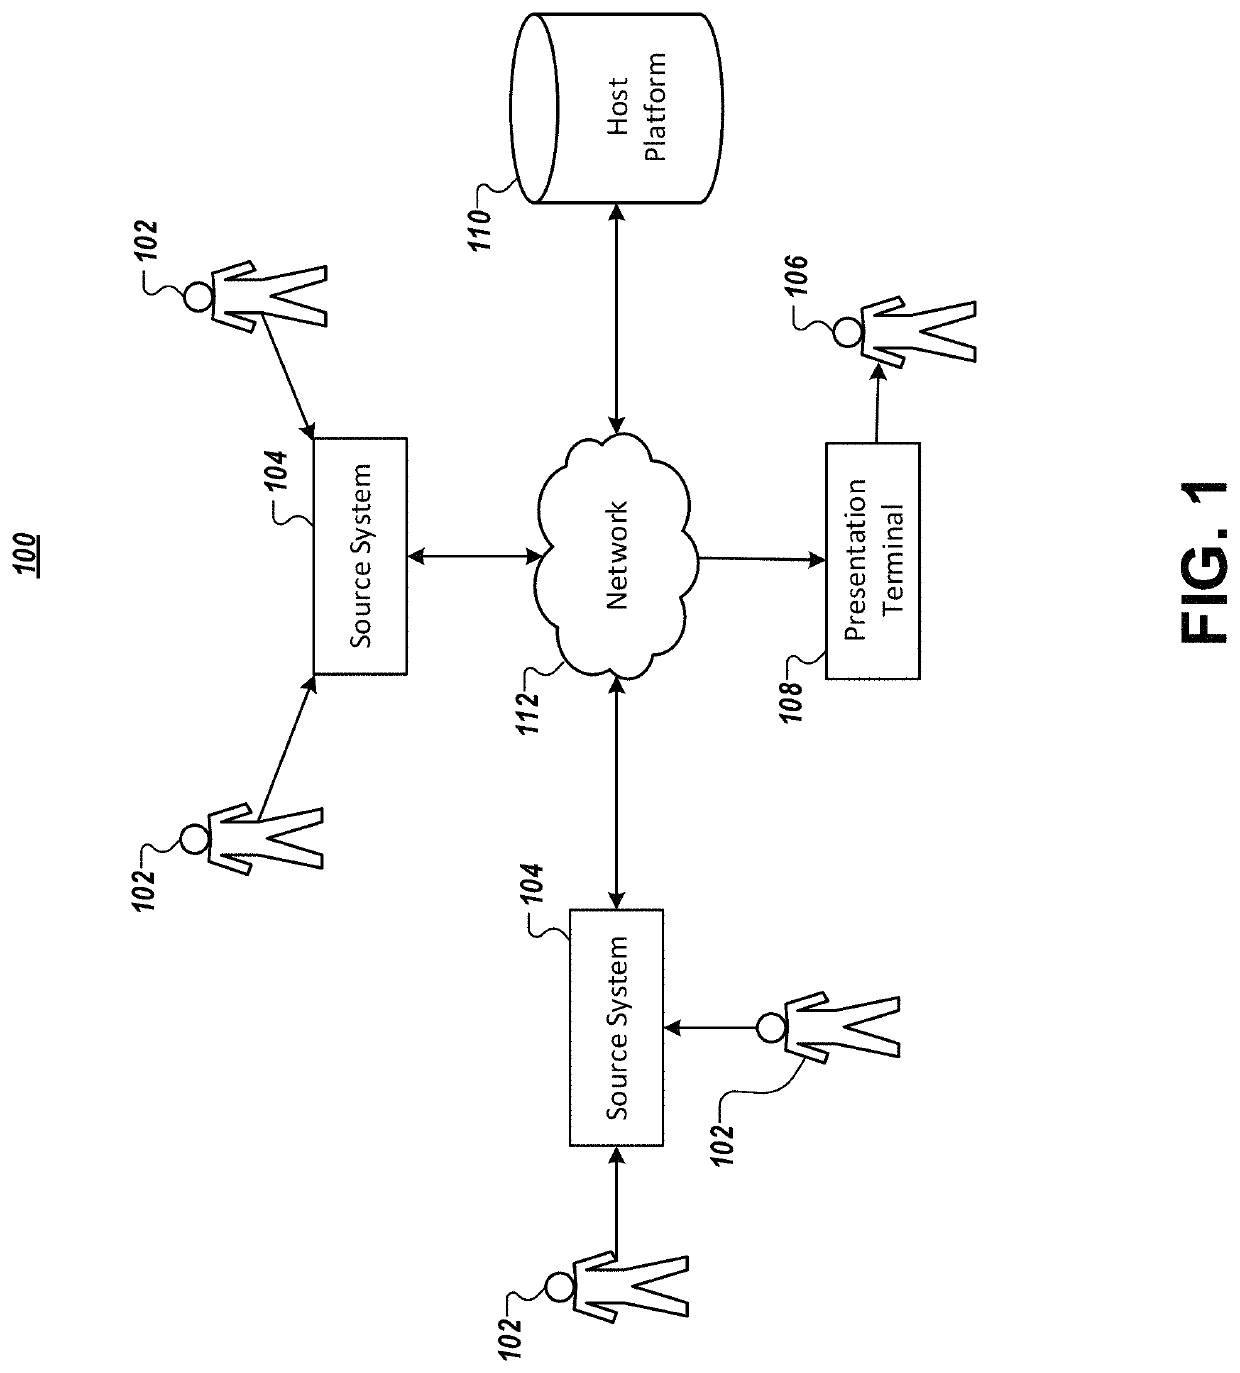 Methods and apparatuses for improved data ingestion using standardized plumbing fields